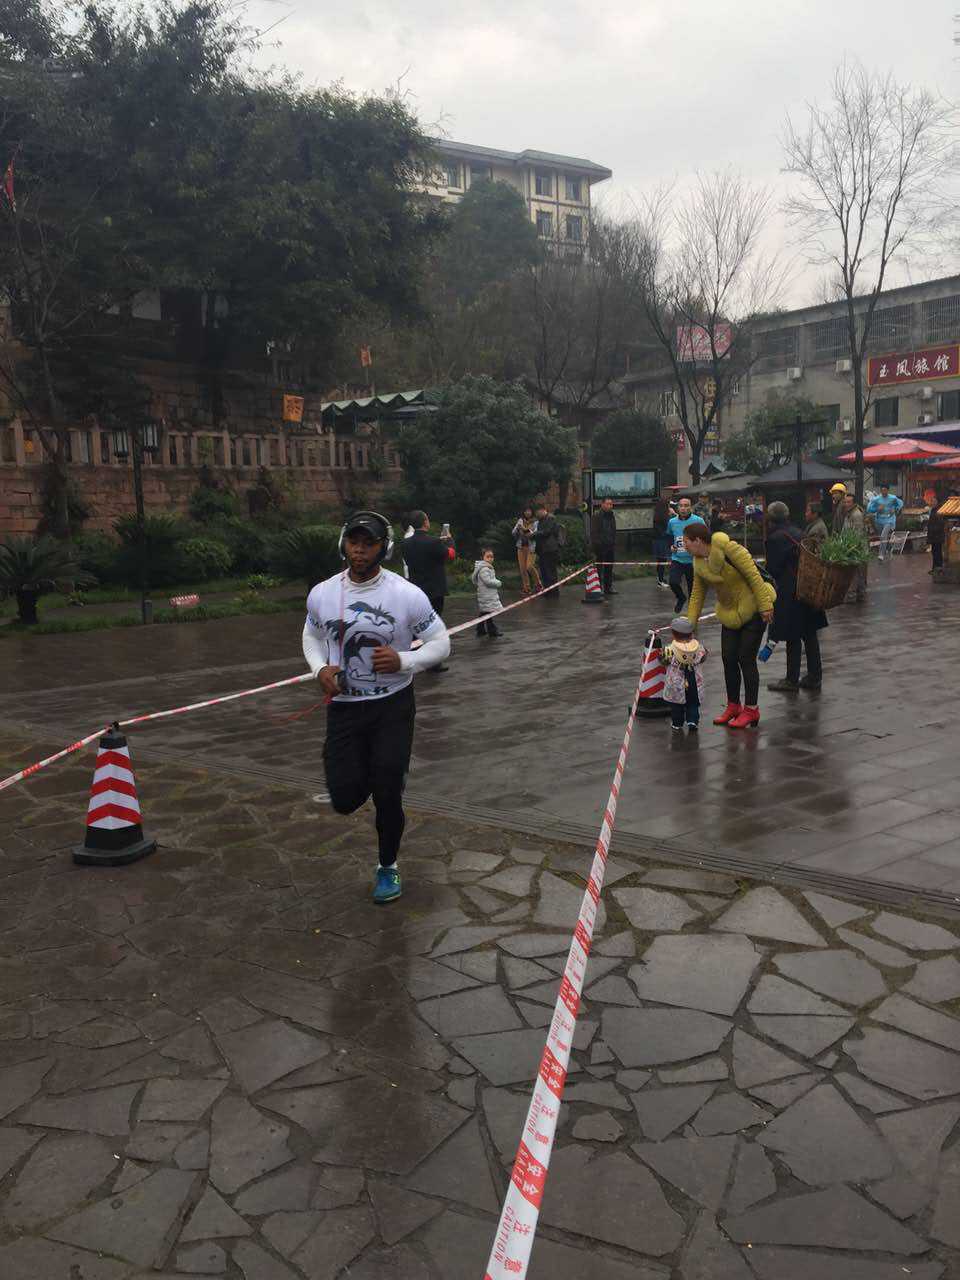 Runners in Sichuan forest park